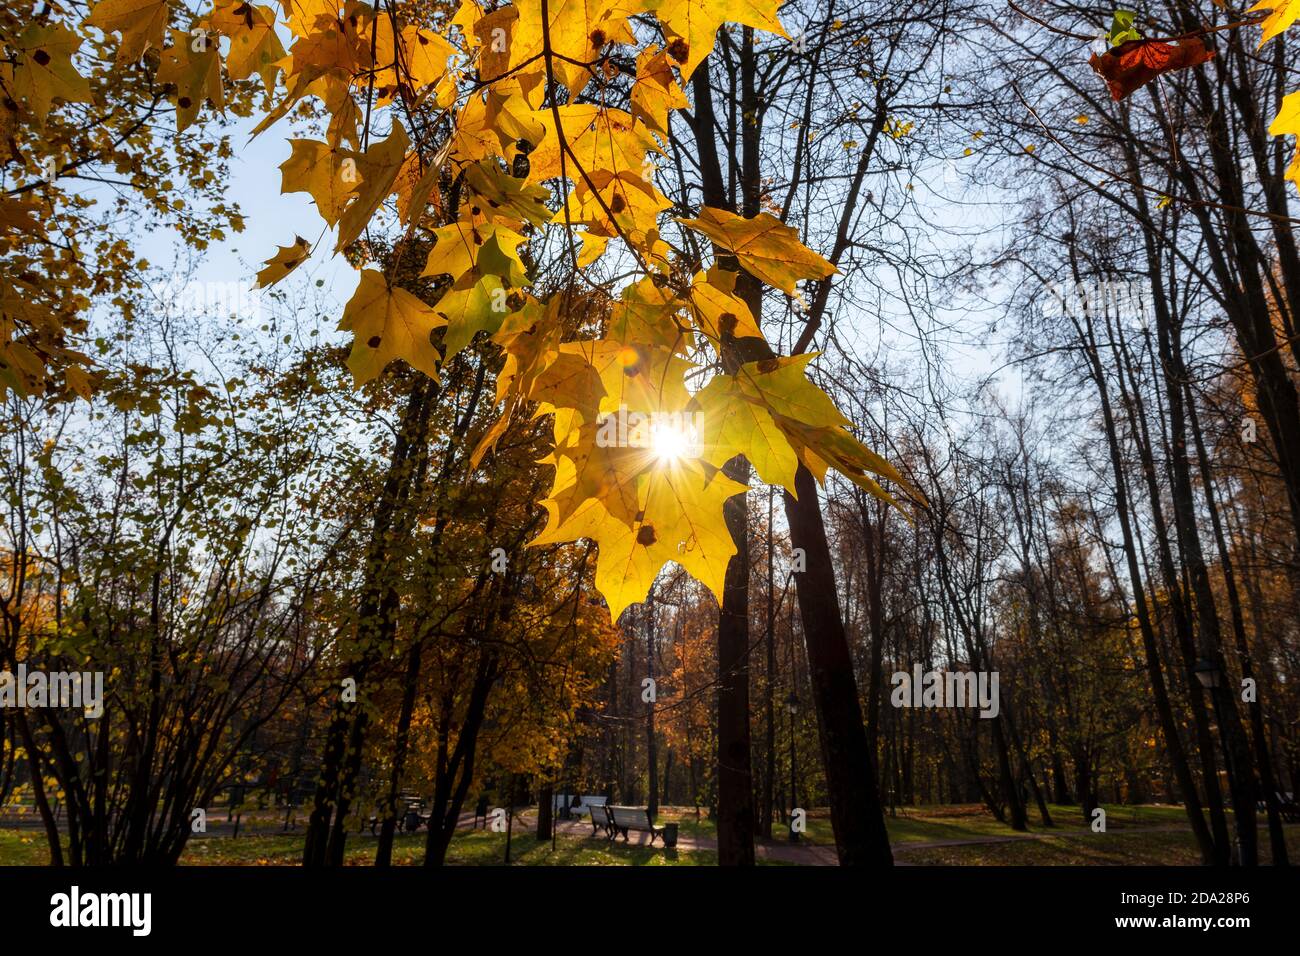 Autumn maple leaves in sunny day Stock Photo